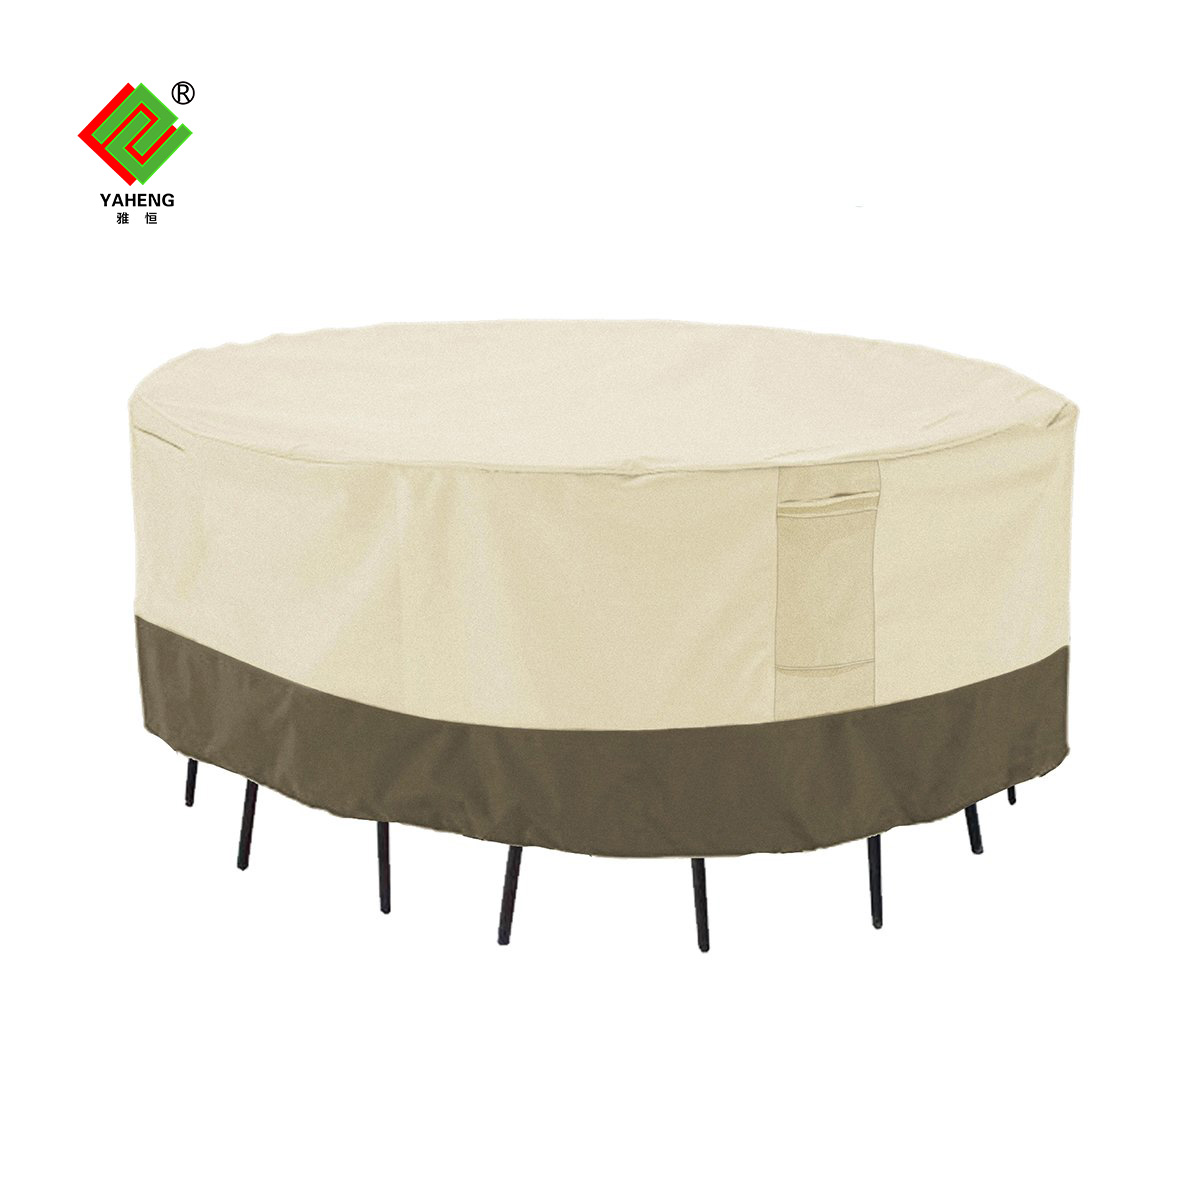 from a outdoor Desk Round table cover manufacturer